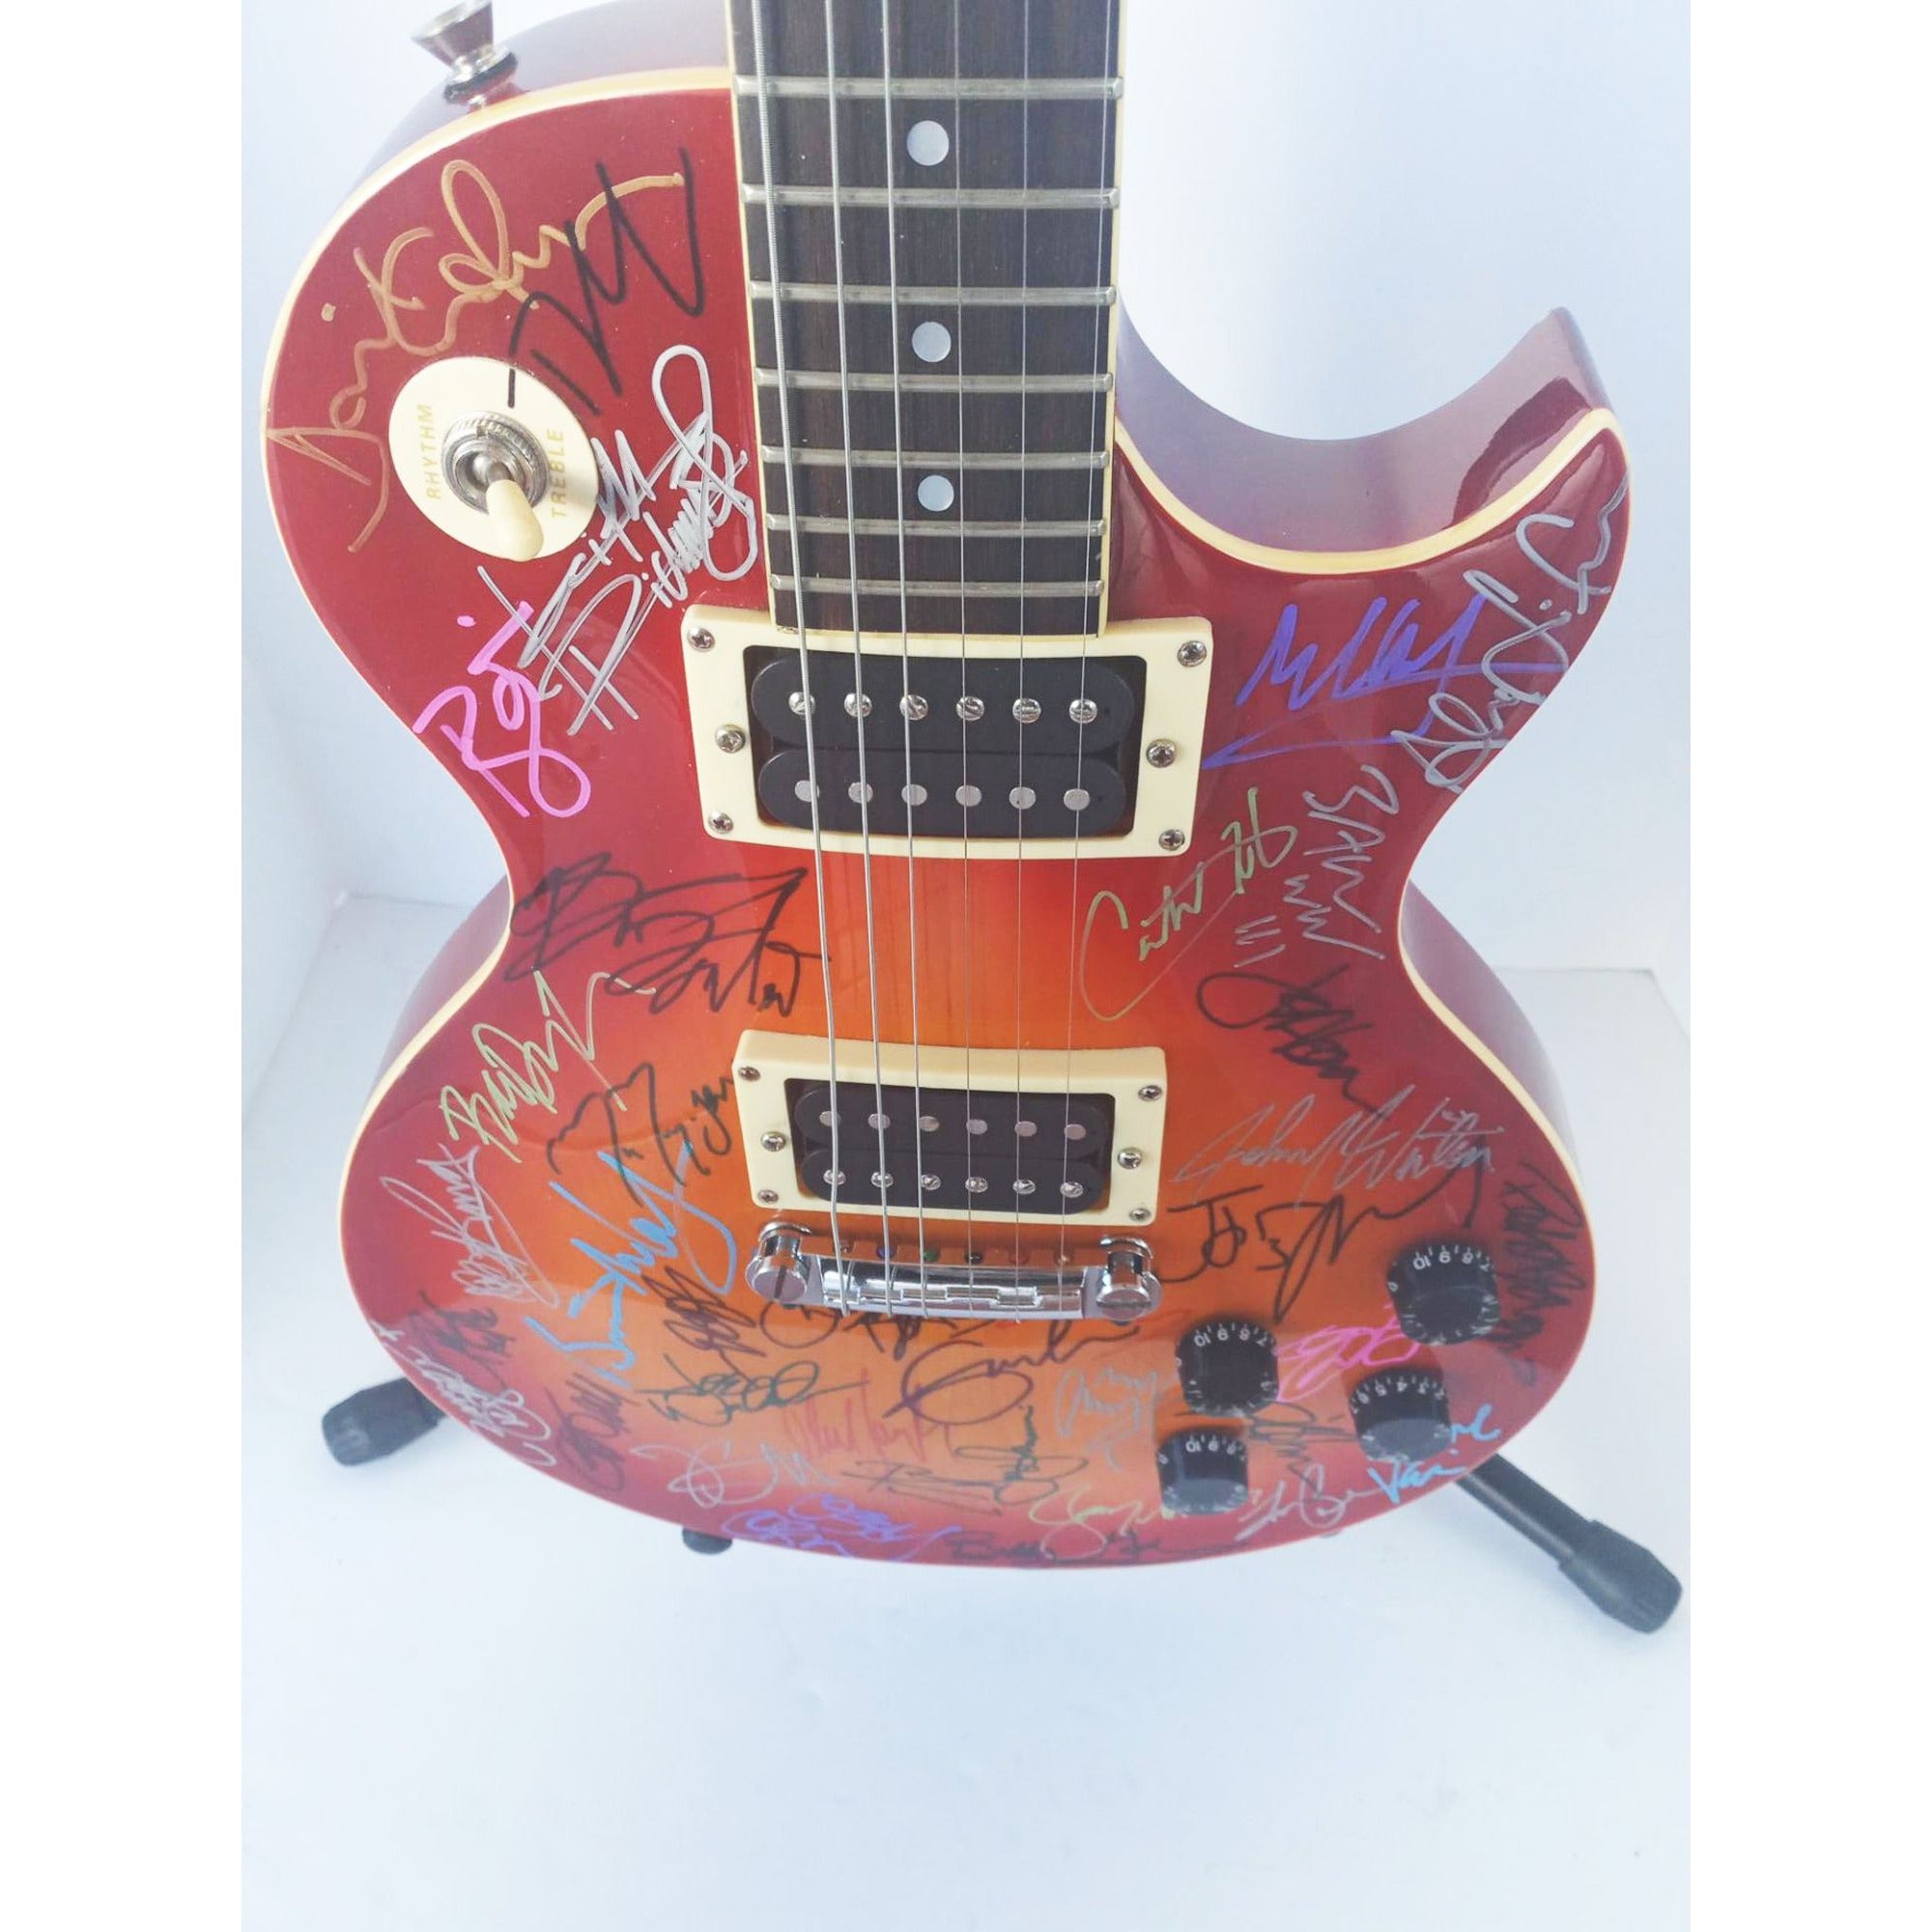 Gibson Maestro Les Paul electric guitar signed by the 30 greatest guitarists of all time Jimmy Page, Eric Clapton, Pete Townshend with proof